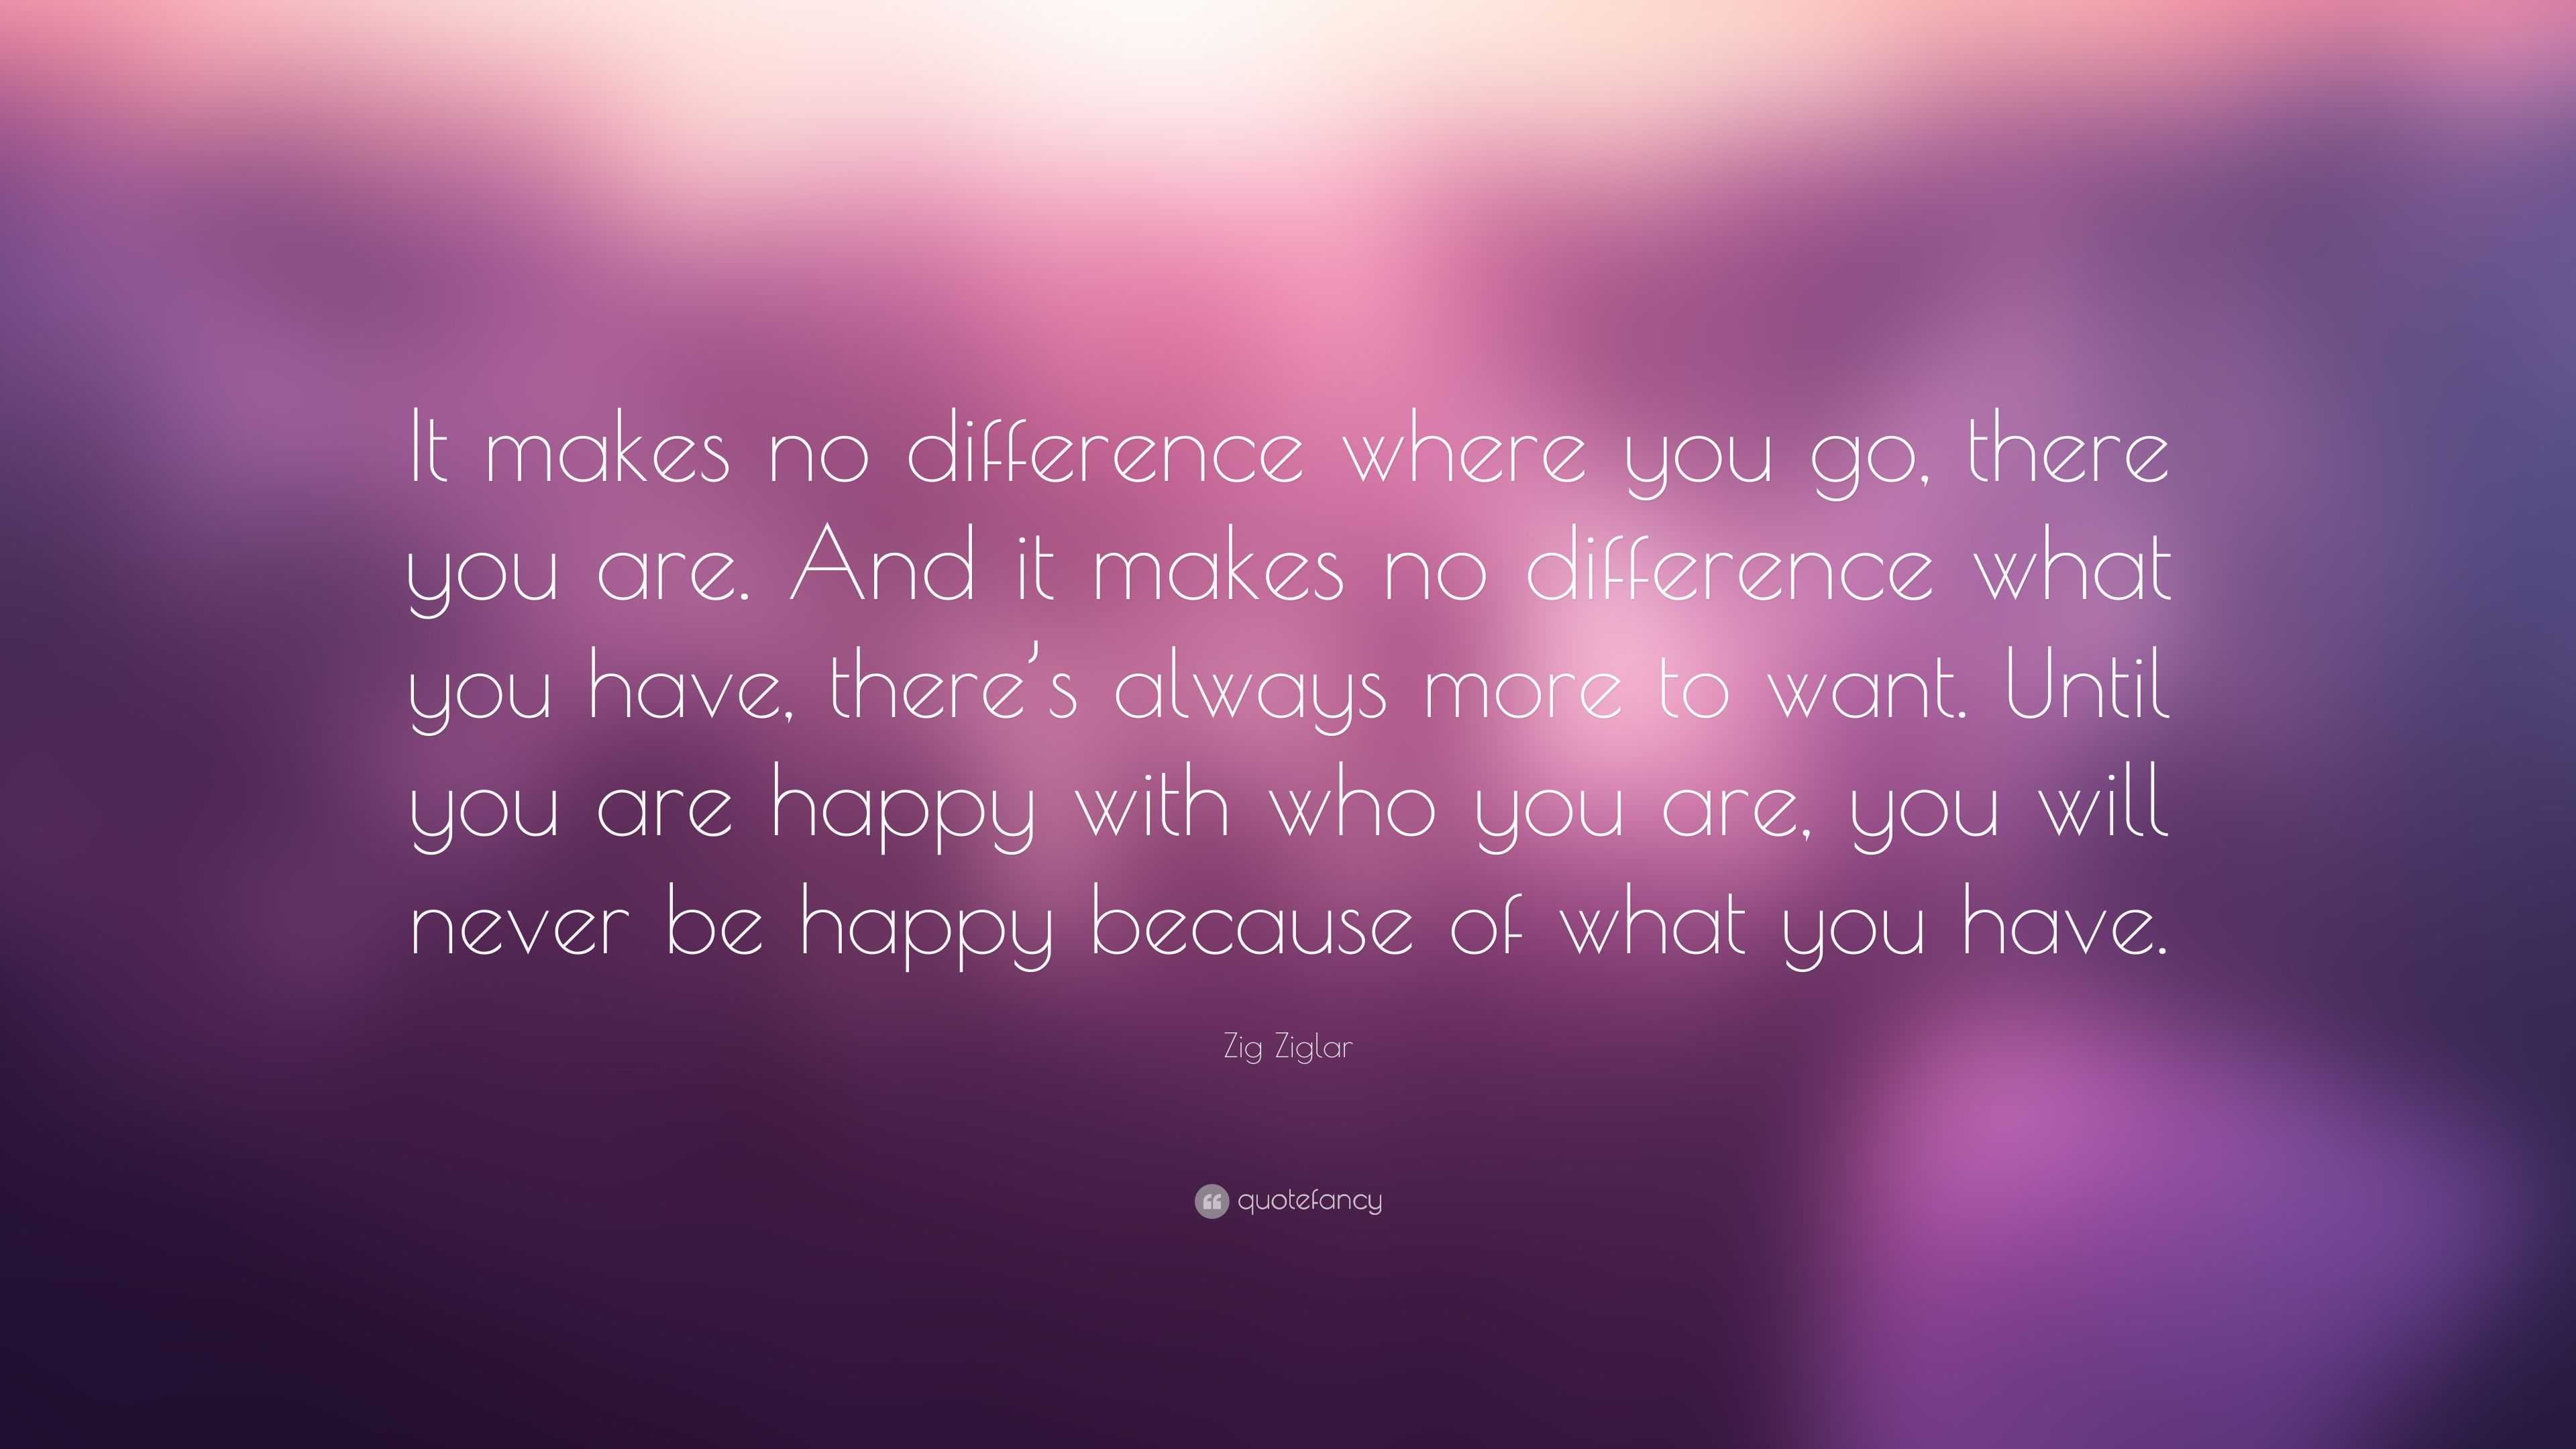 Zig Ziglar Quote: “It makes no difference where you go, there you are ...